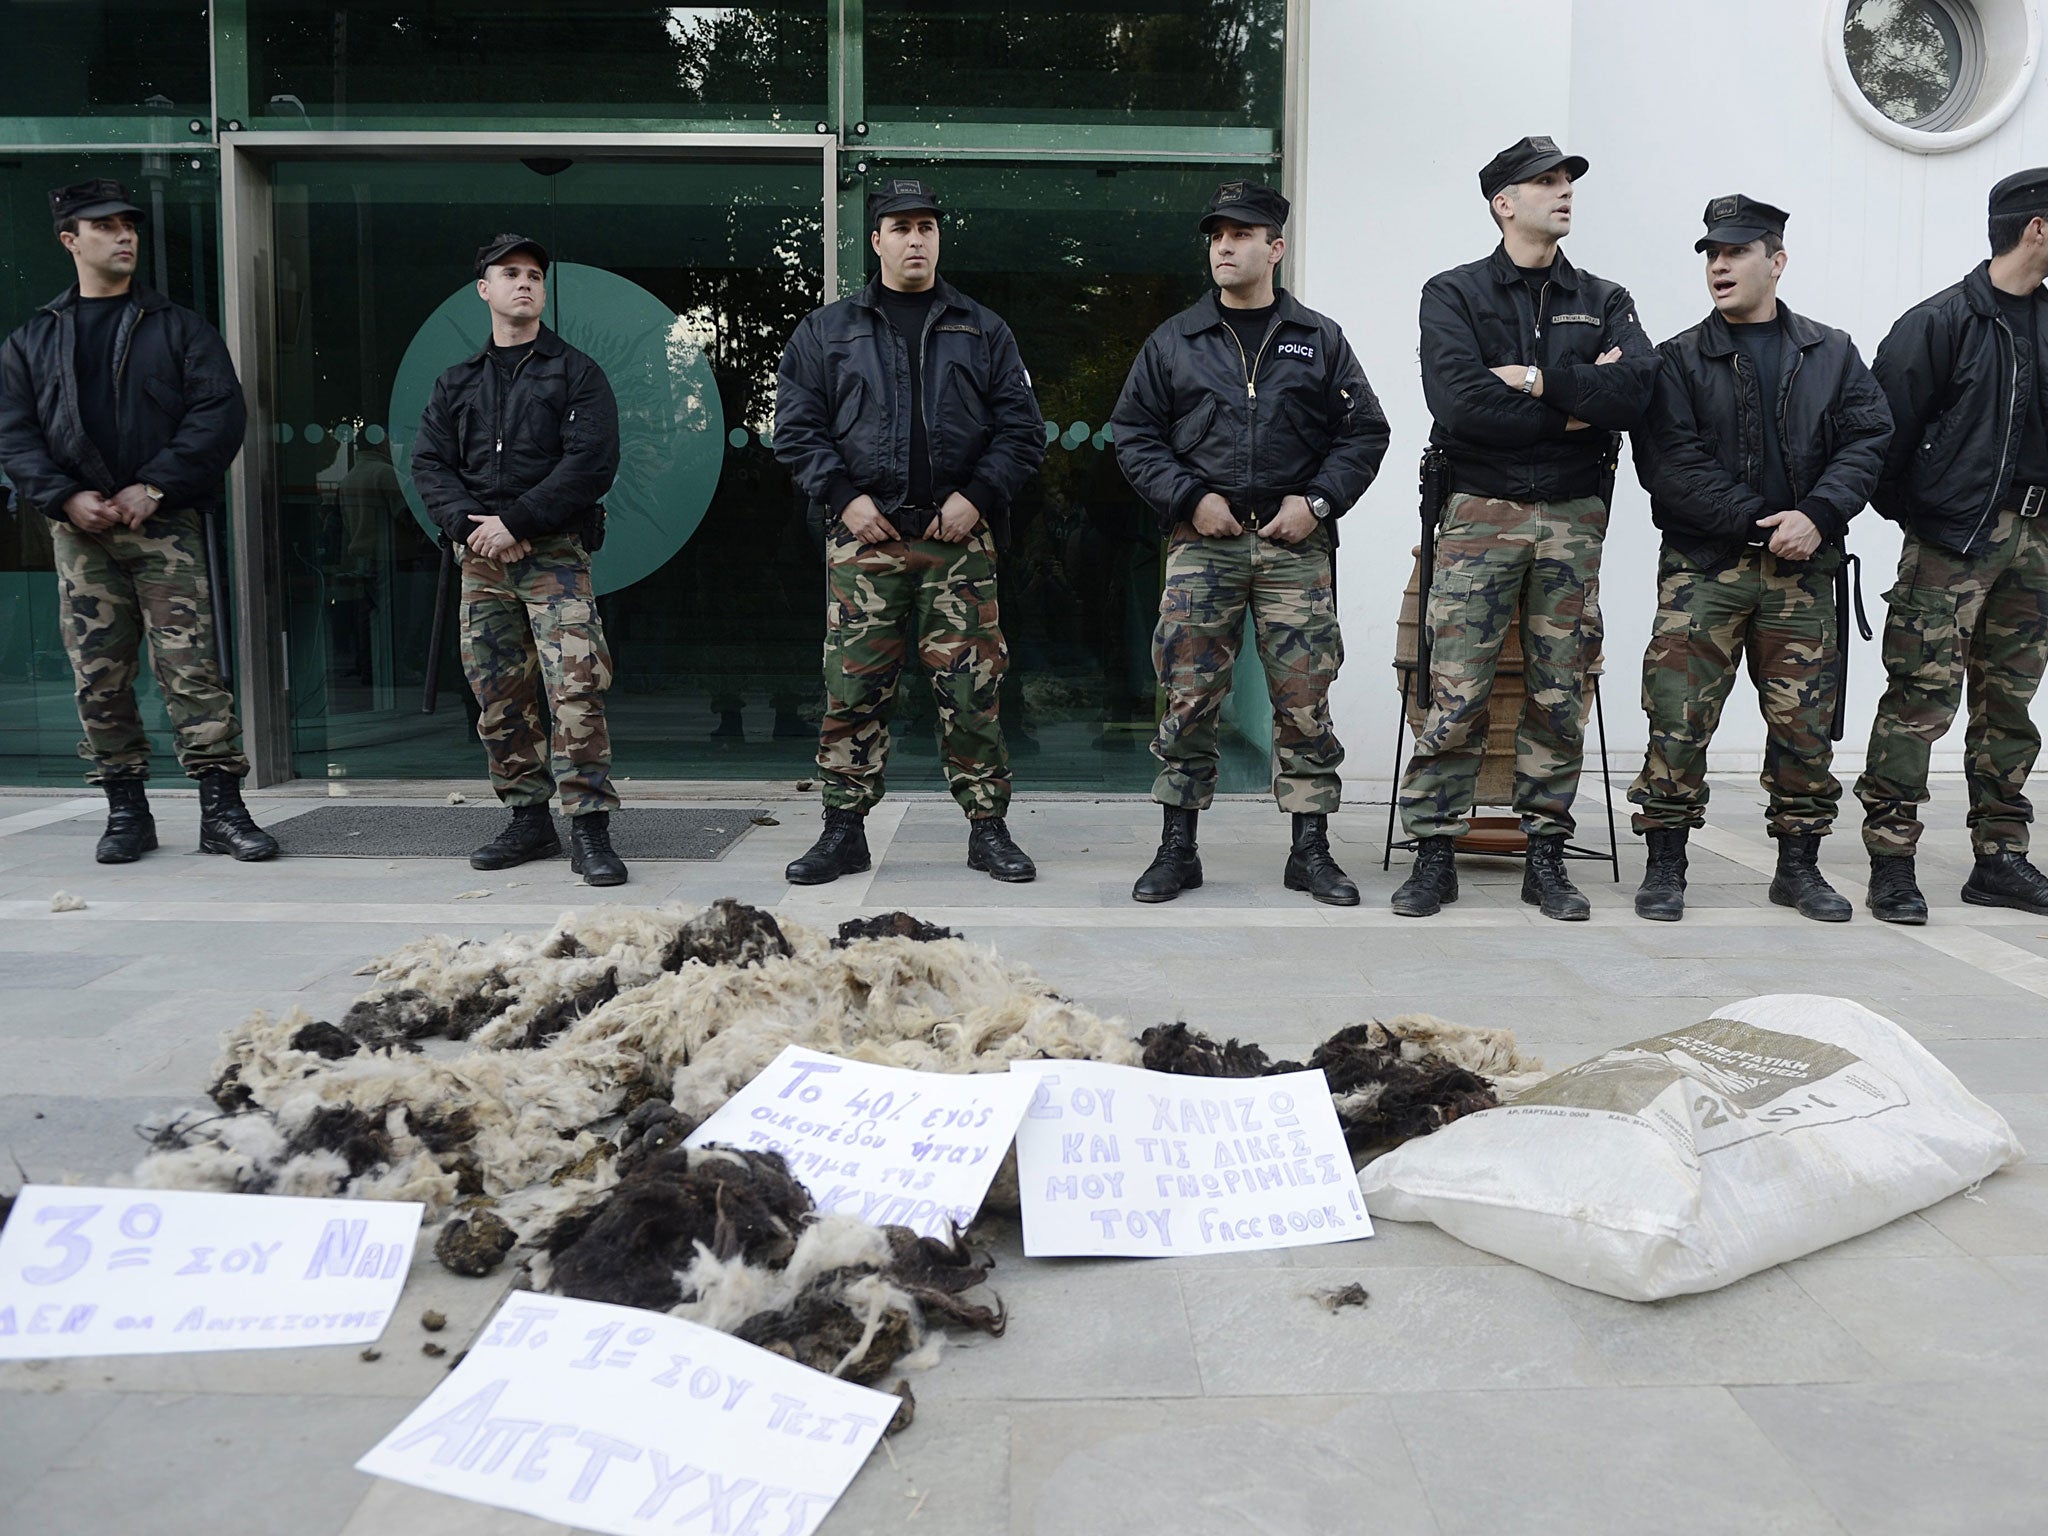 Sheared wool symbolising the cuts outside the Cypriot Parliament